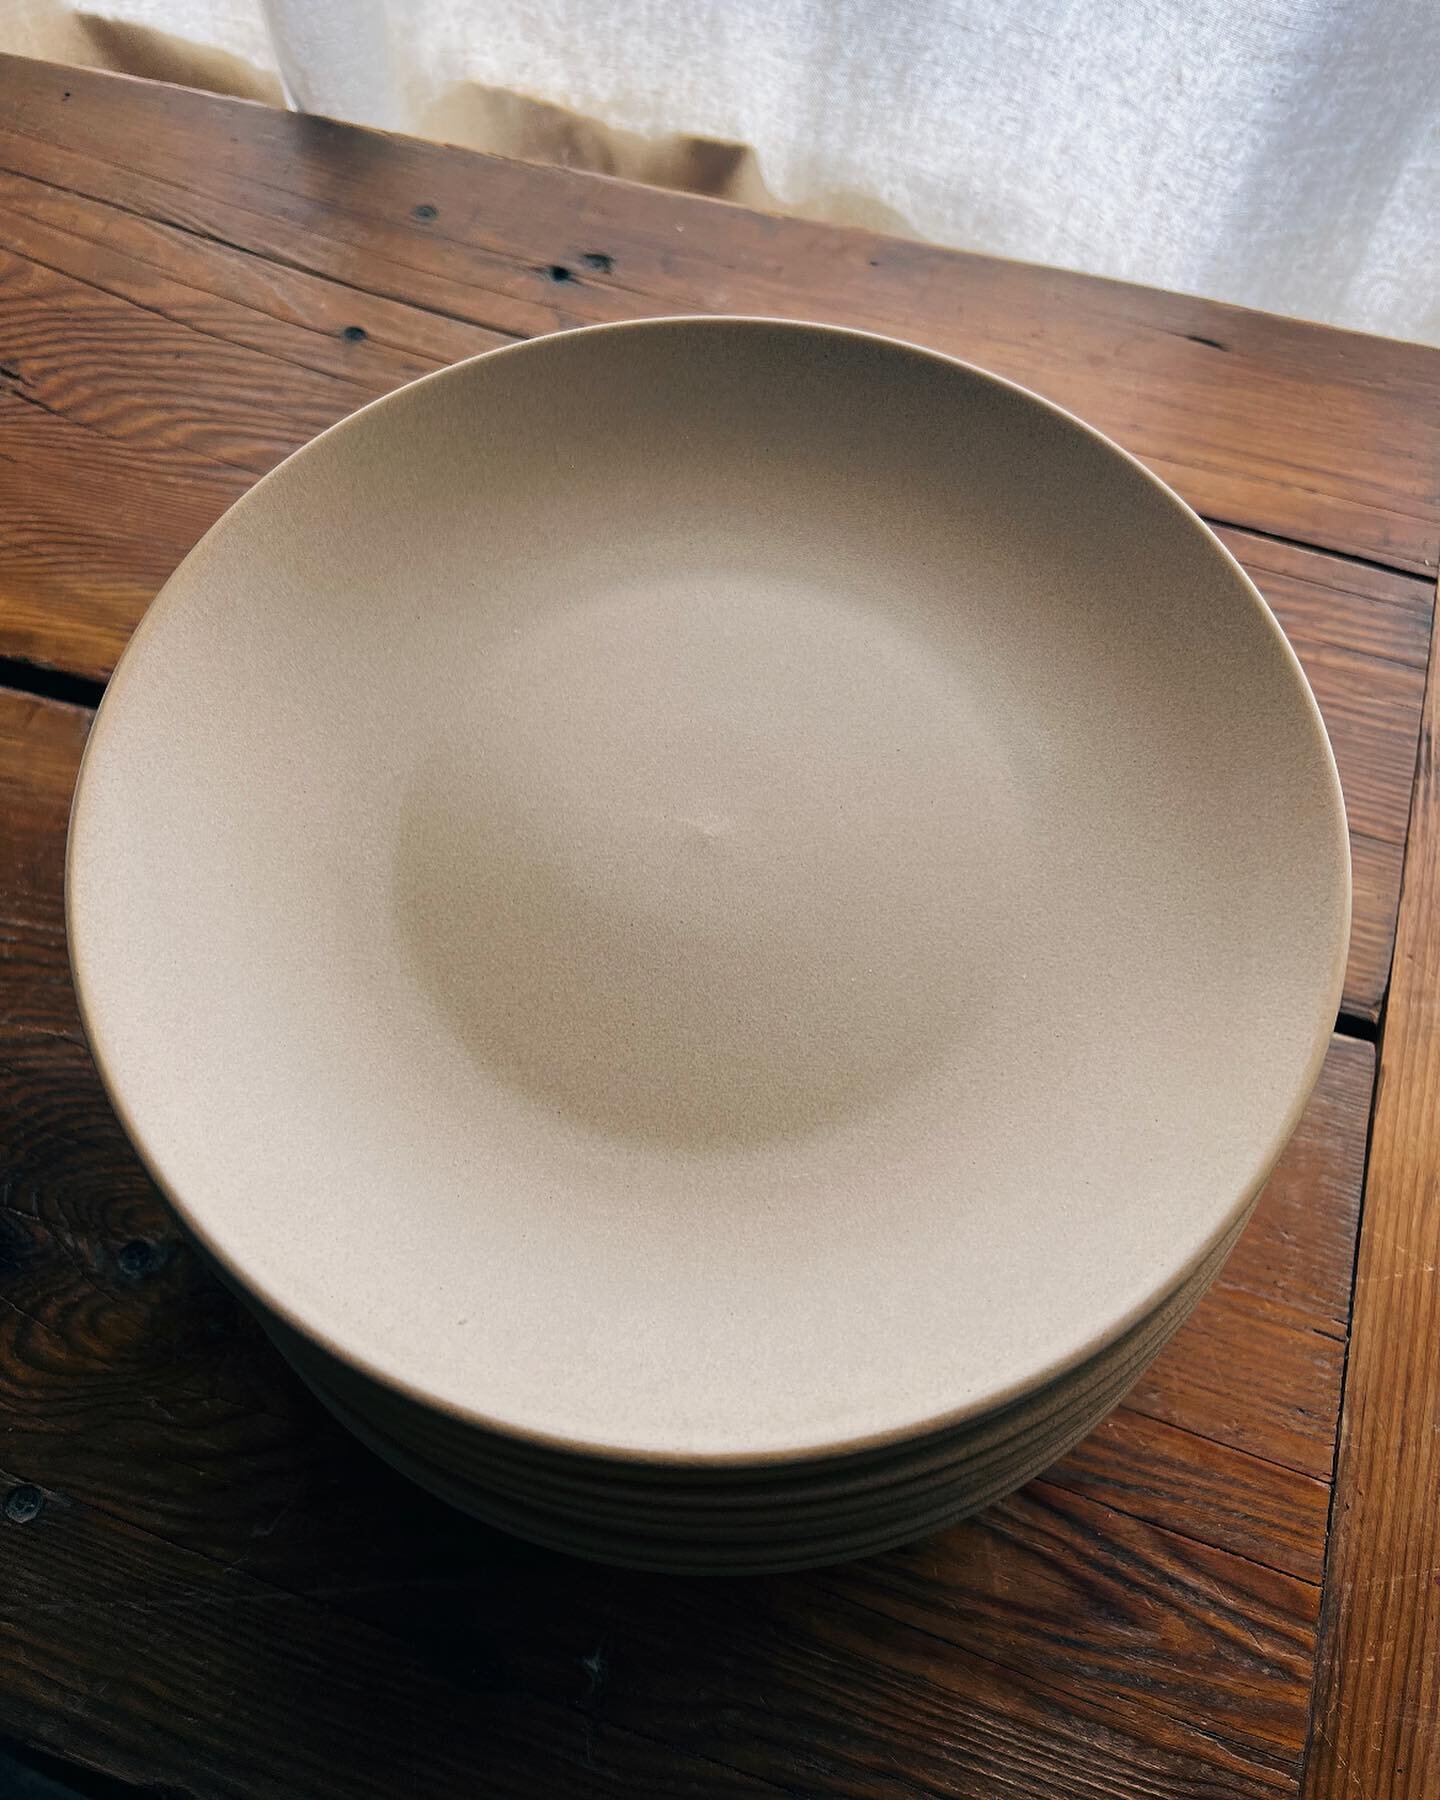 New inventory!  The new sand plate is a matte finish with a textured feel. This plate pairs beautifully with boho, rustic, earthy and more!